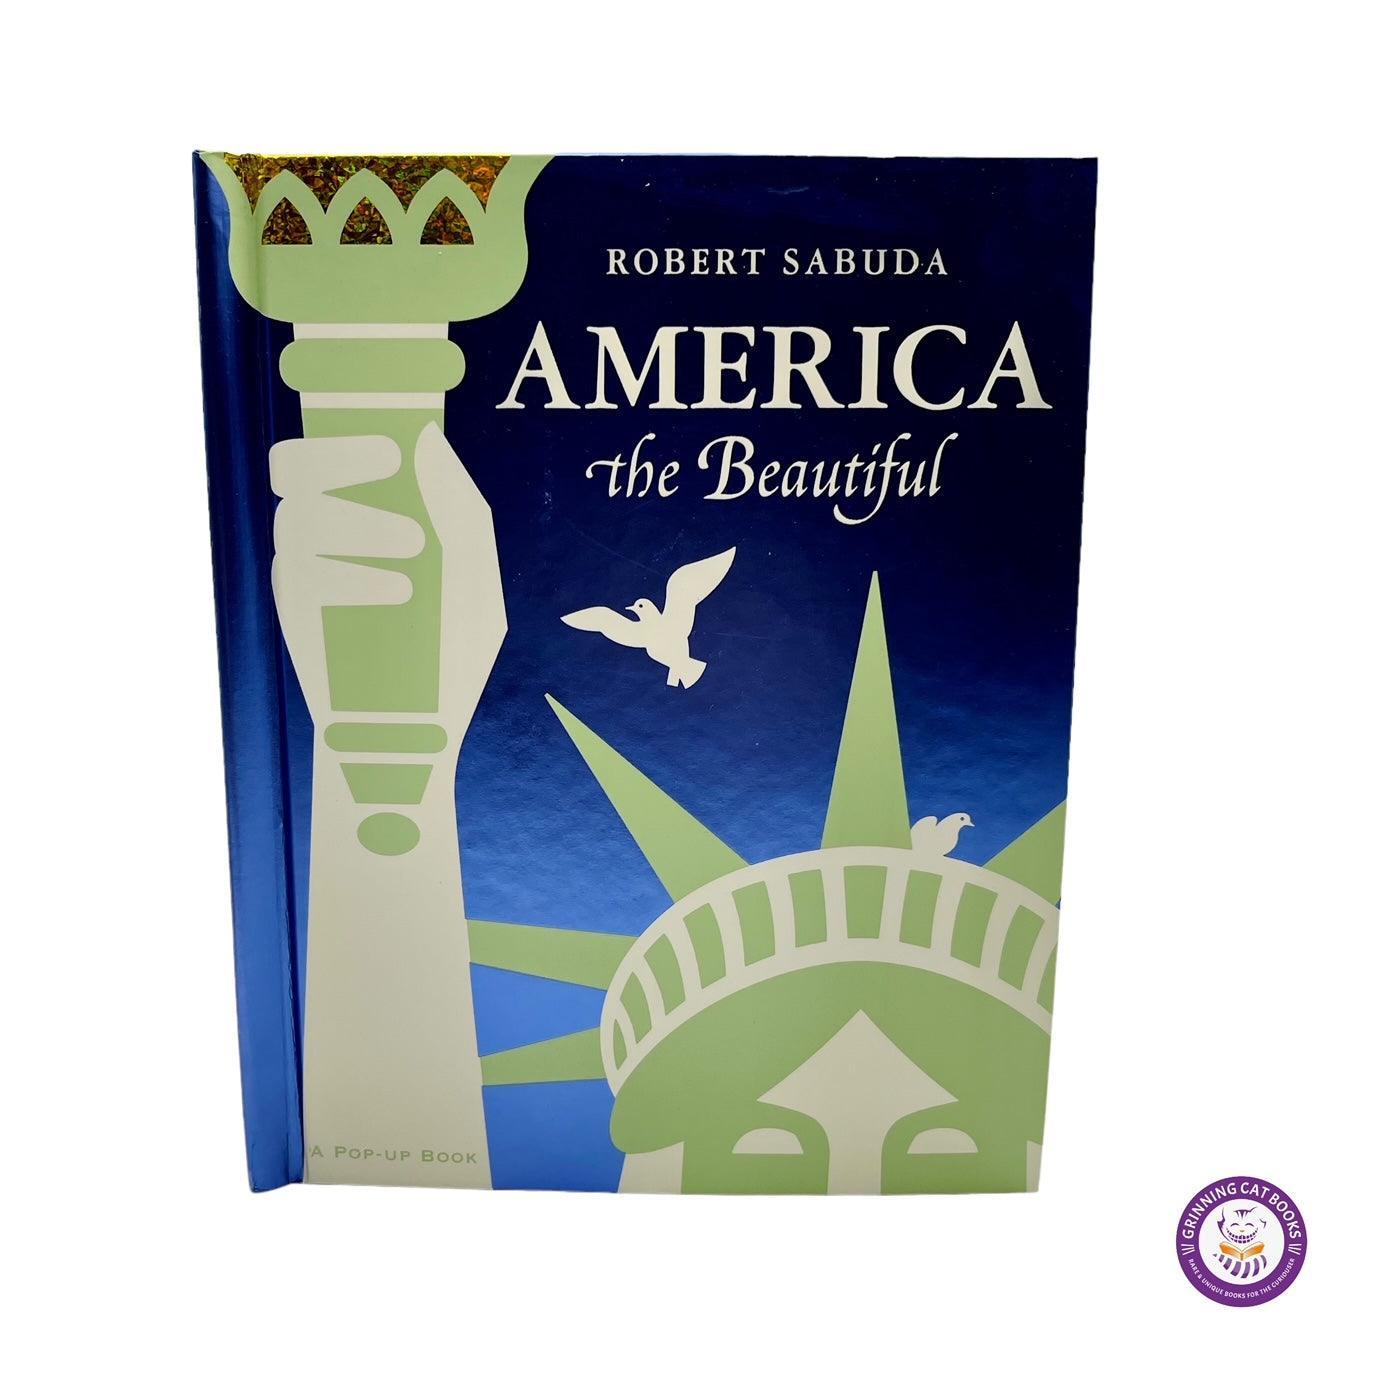 America the Beautiful (signed by Robert Sabuda) - Grinning Cat Books - Books - POPUP